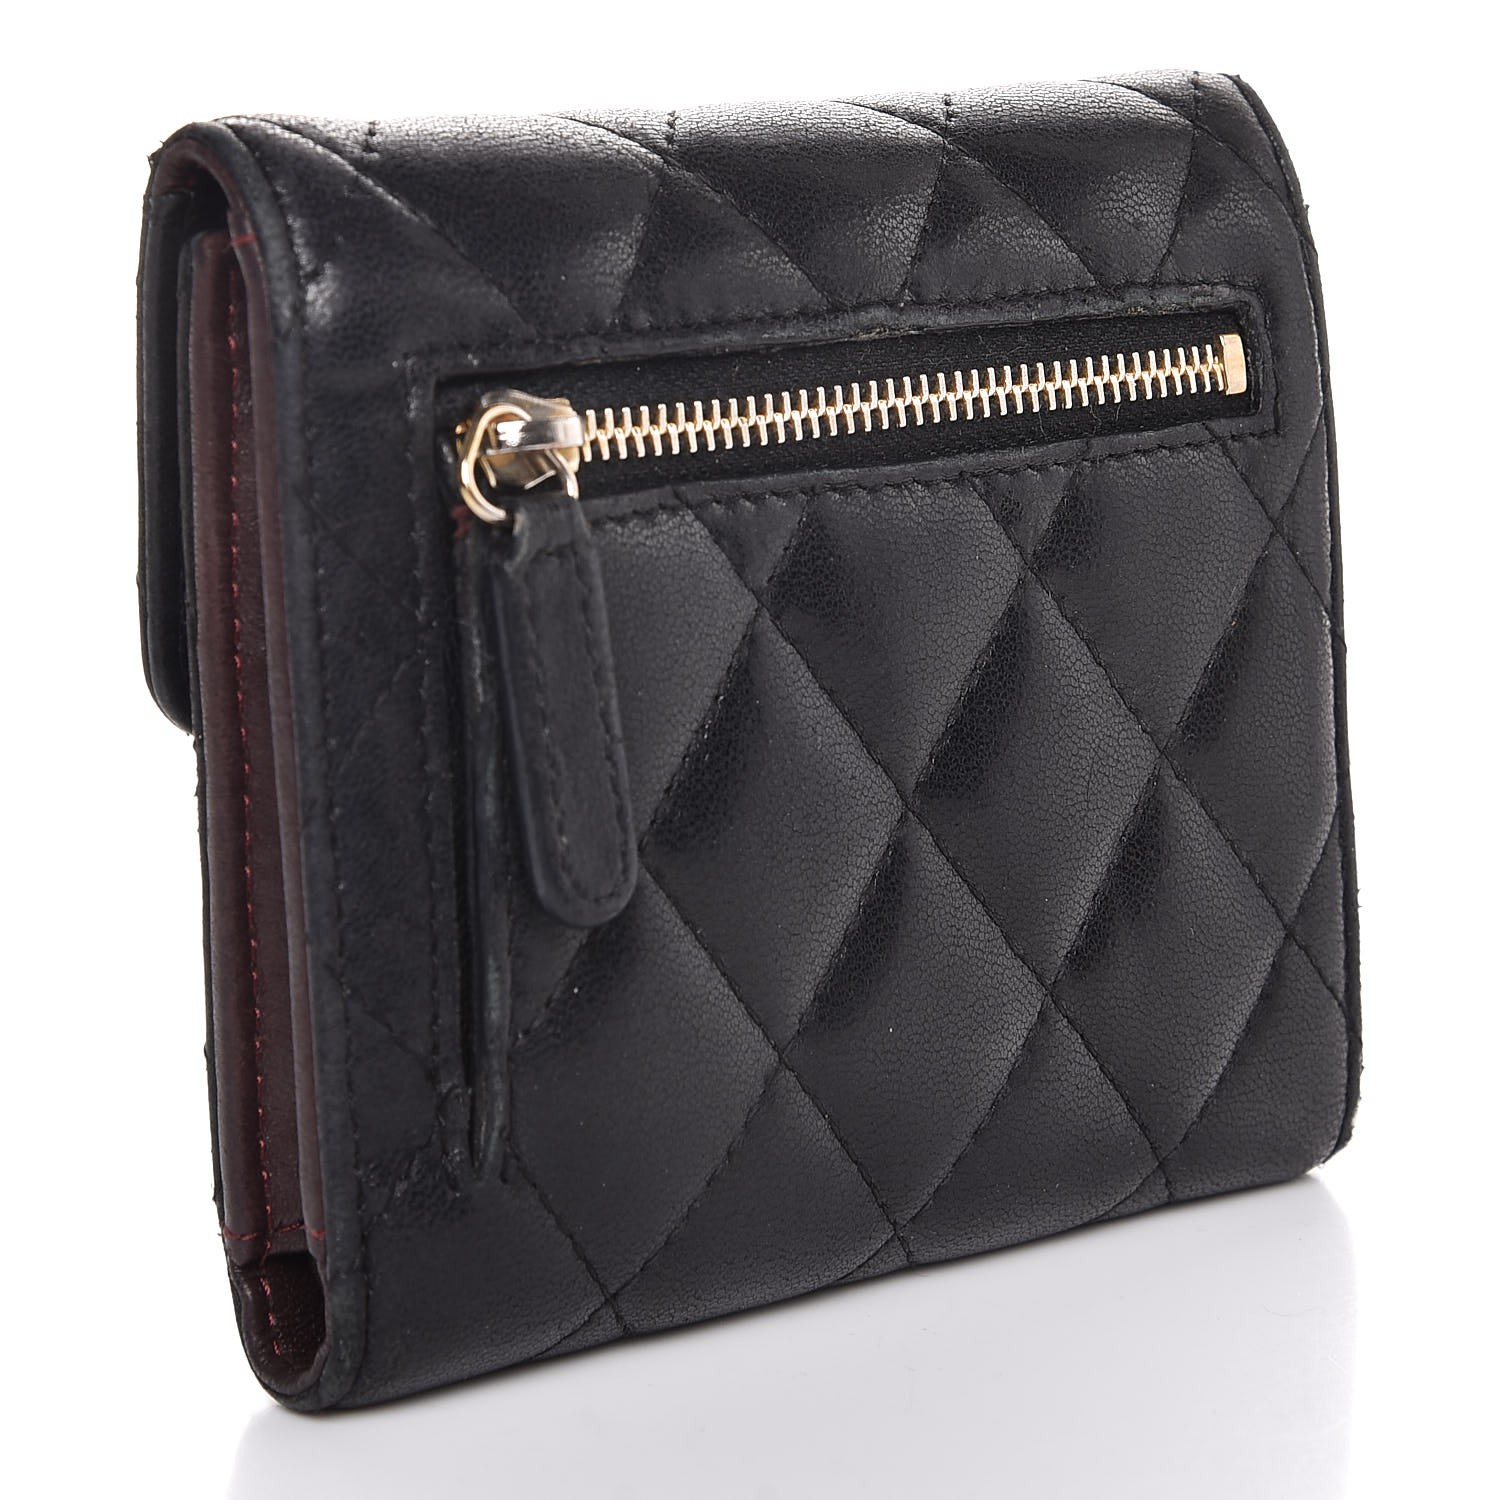 CHANEL Lambskin Quilted Small Compact Wallet Black 301556